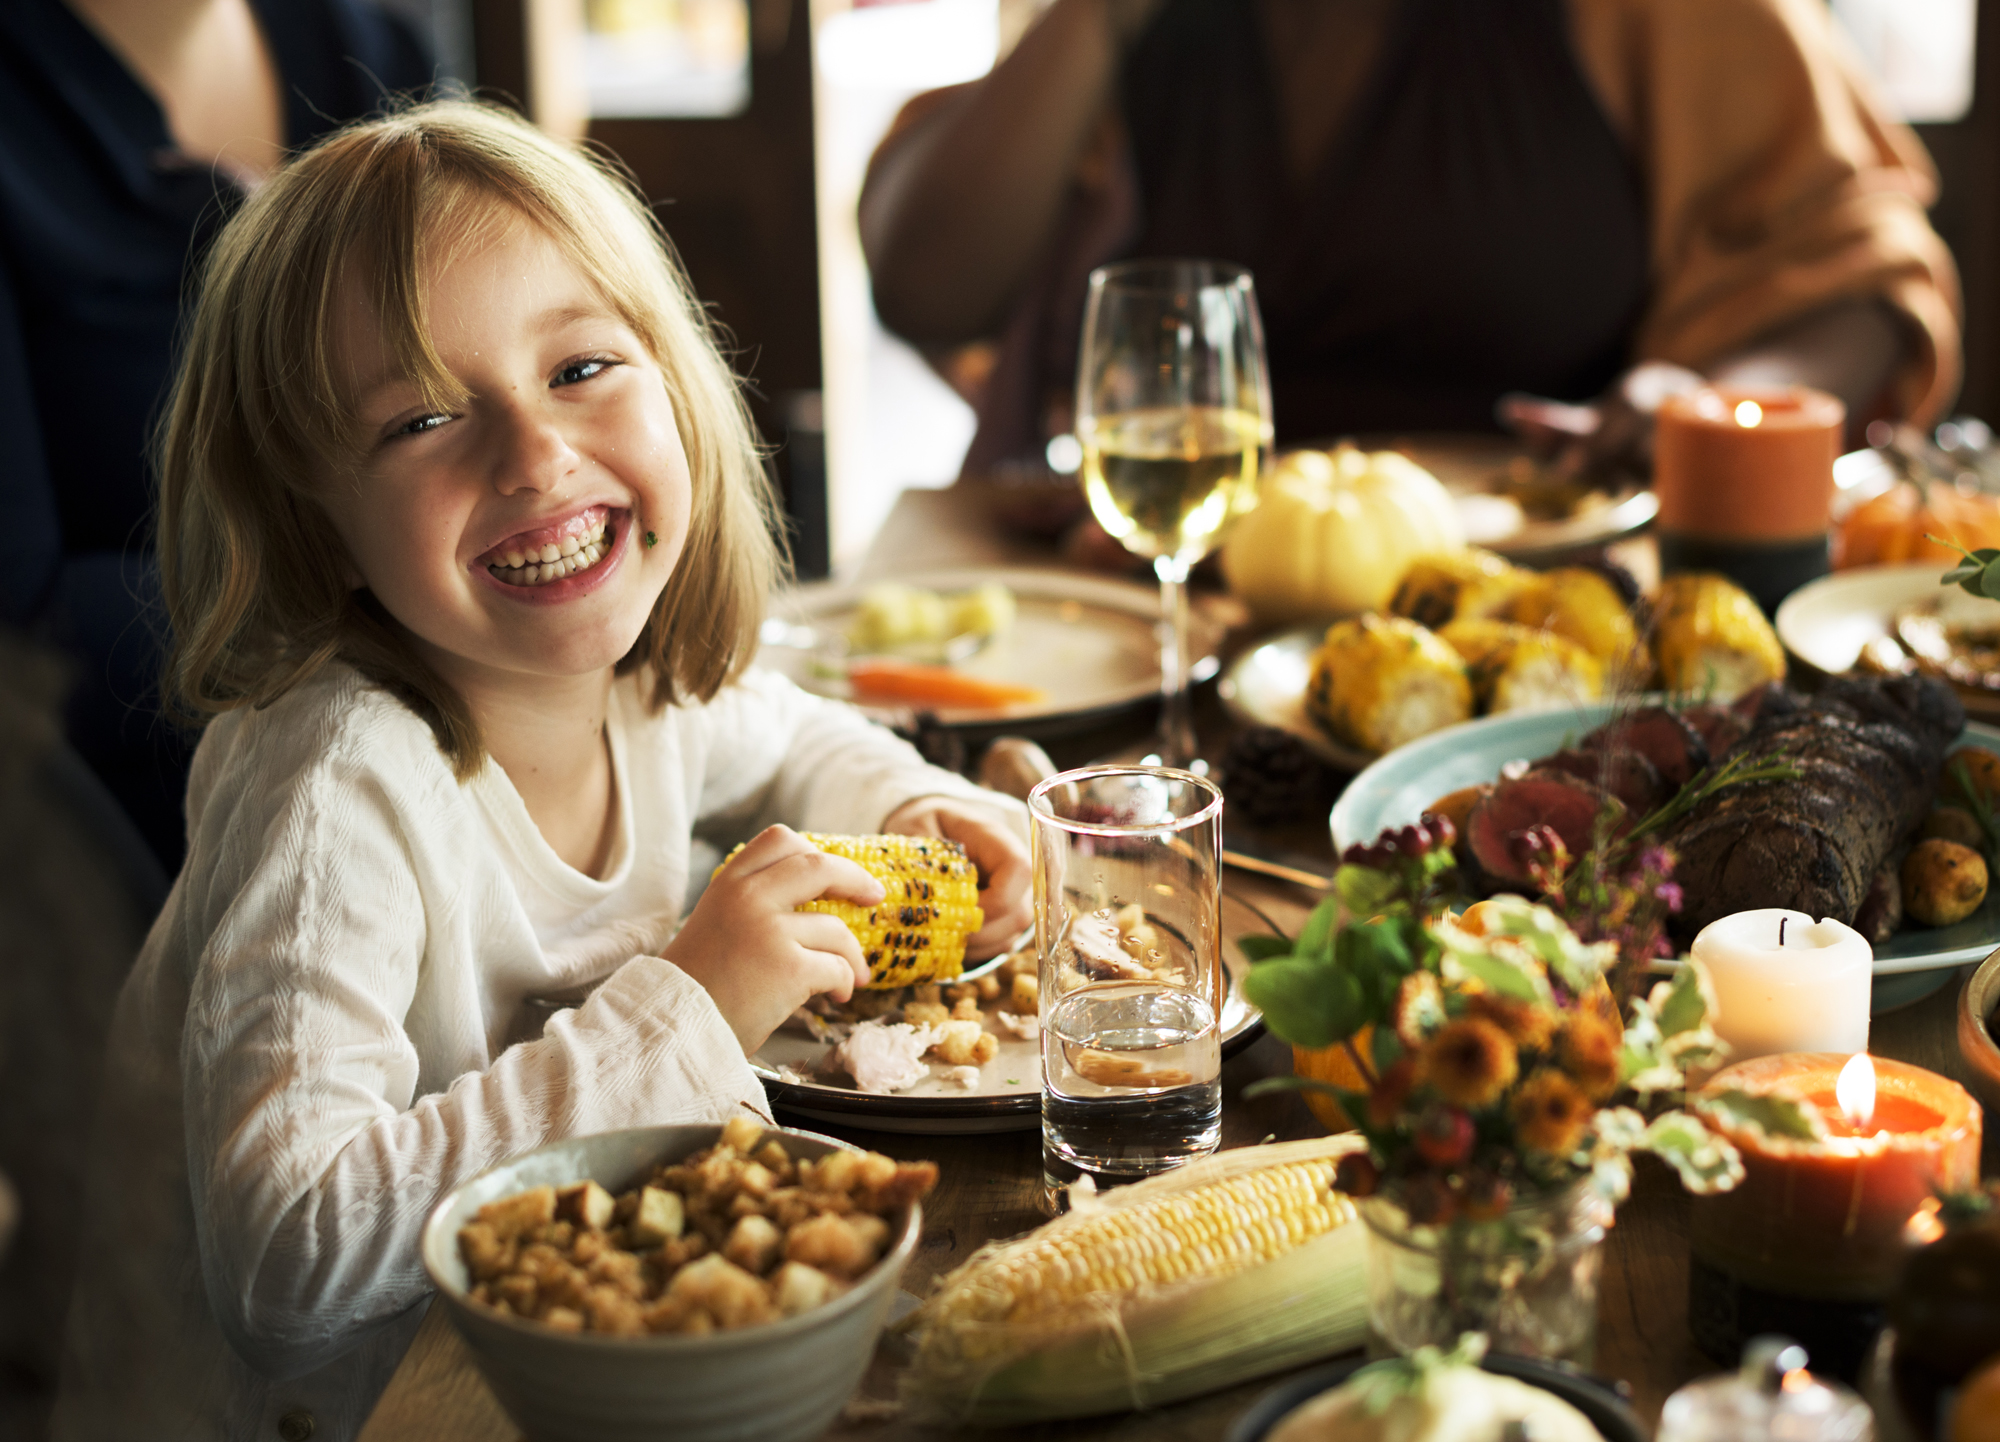 make a decision and commit to something young girl eating thanksgiving dinner at a family table